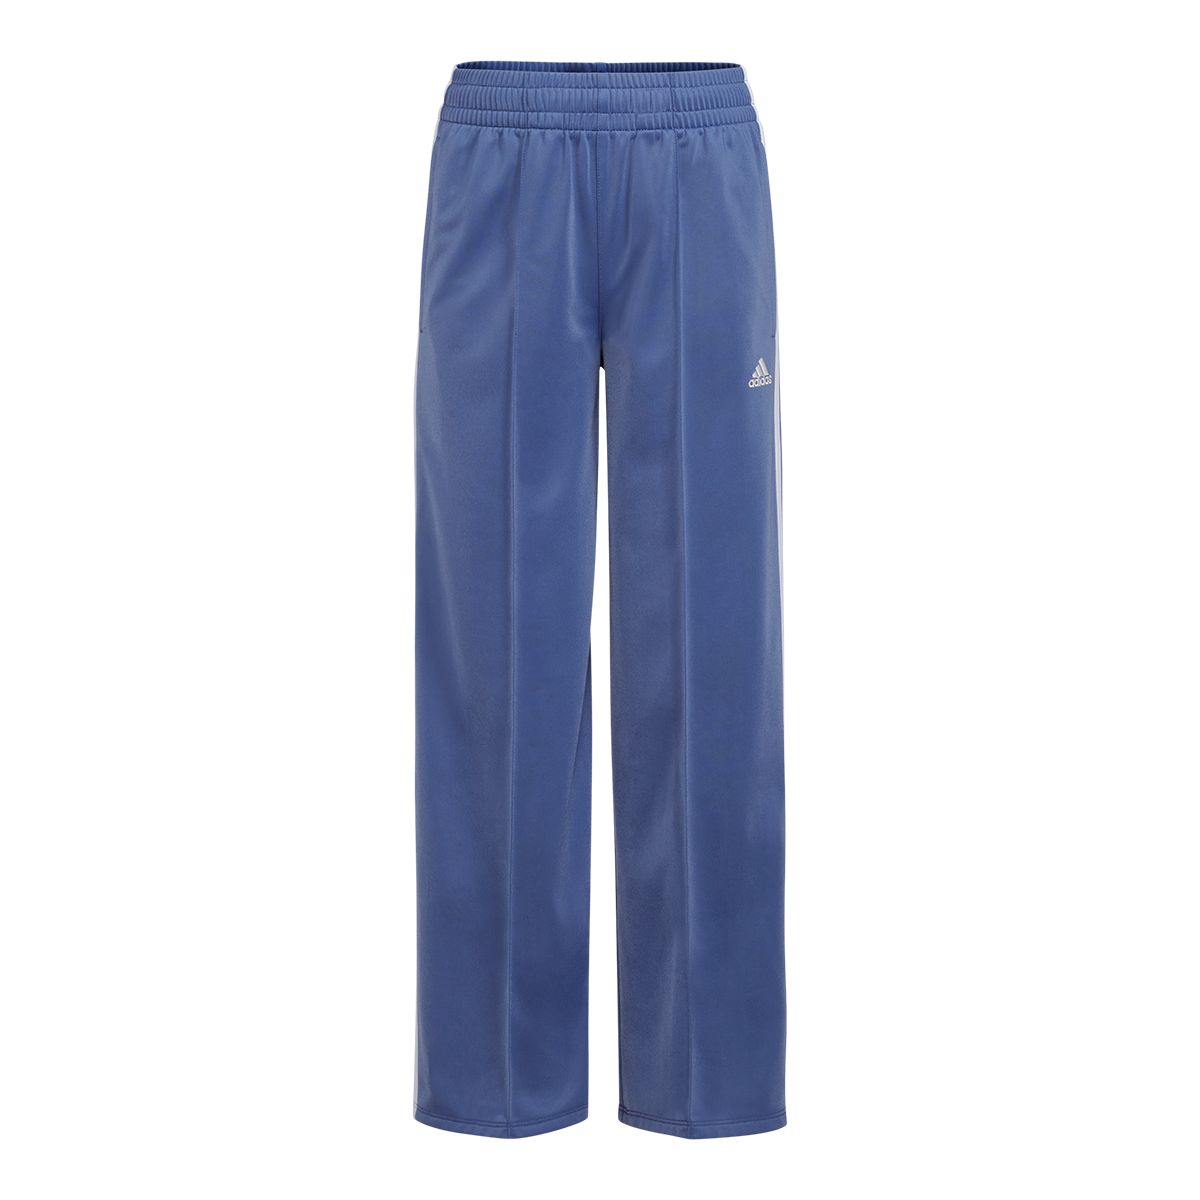 https://media-www.sportchek.ca/product/div-03-softgoods/dpt-72-casual-clothing/sdpt-04-girls/334145581/adidas-girls-3-stripe-wide-leg-tricot-pants-e63183c1-58ff-4435-9cfe-1aa97aace95b-jpgrendition.jpg?imdensity=1&imwidth=1244&impolicy=mZoom